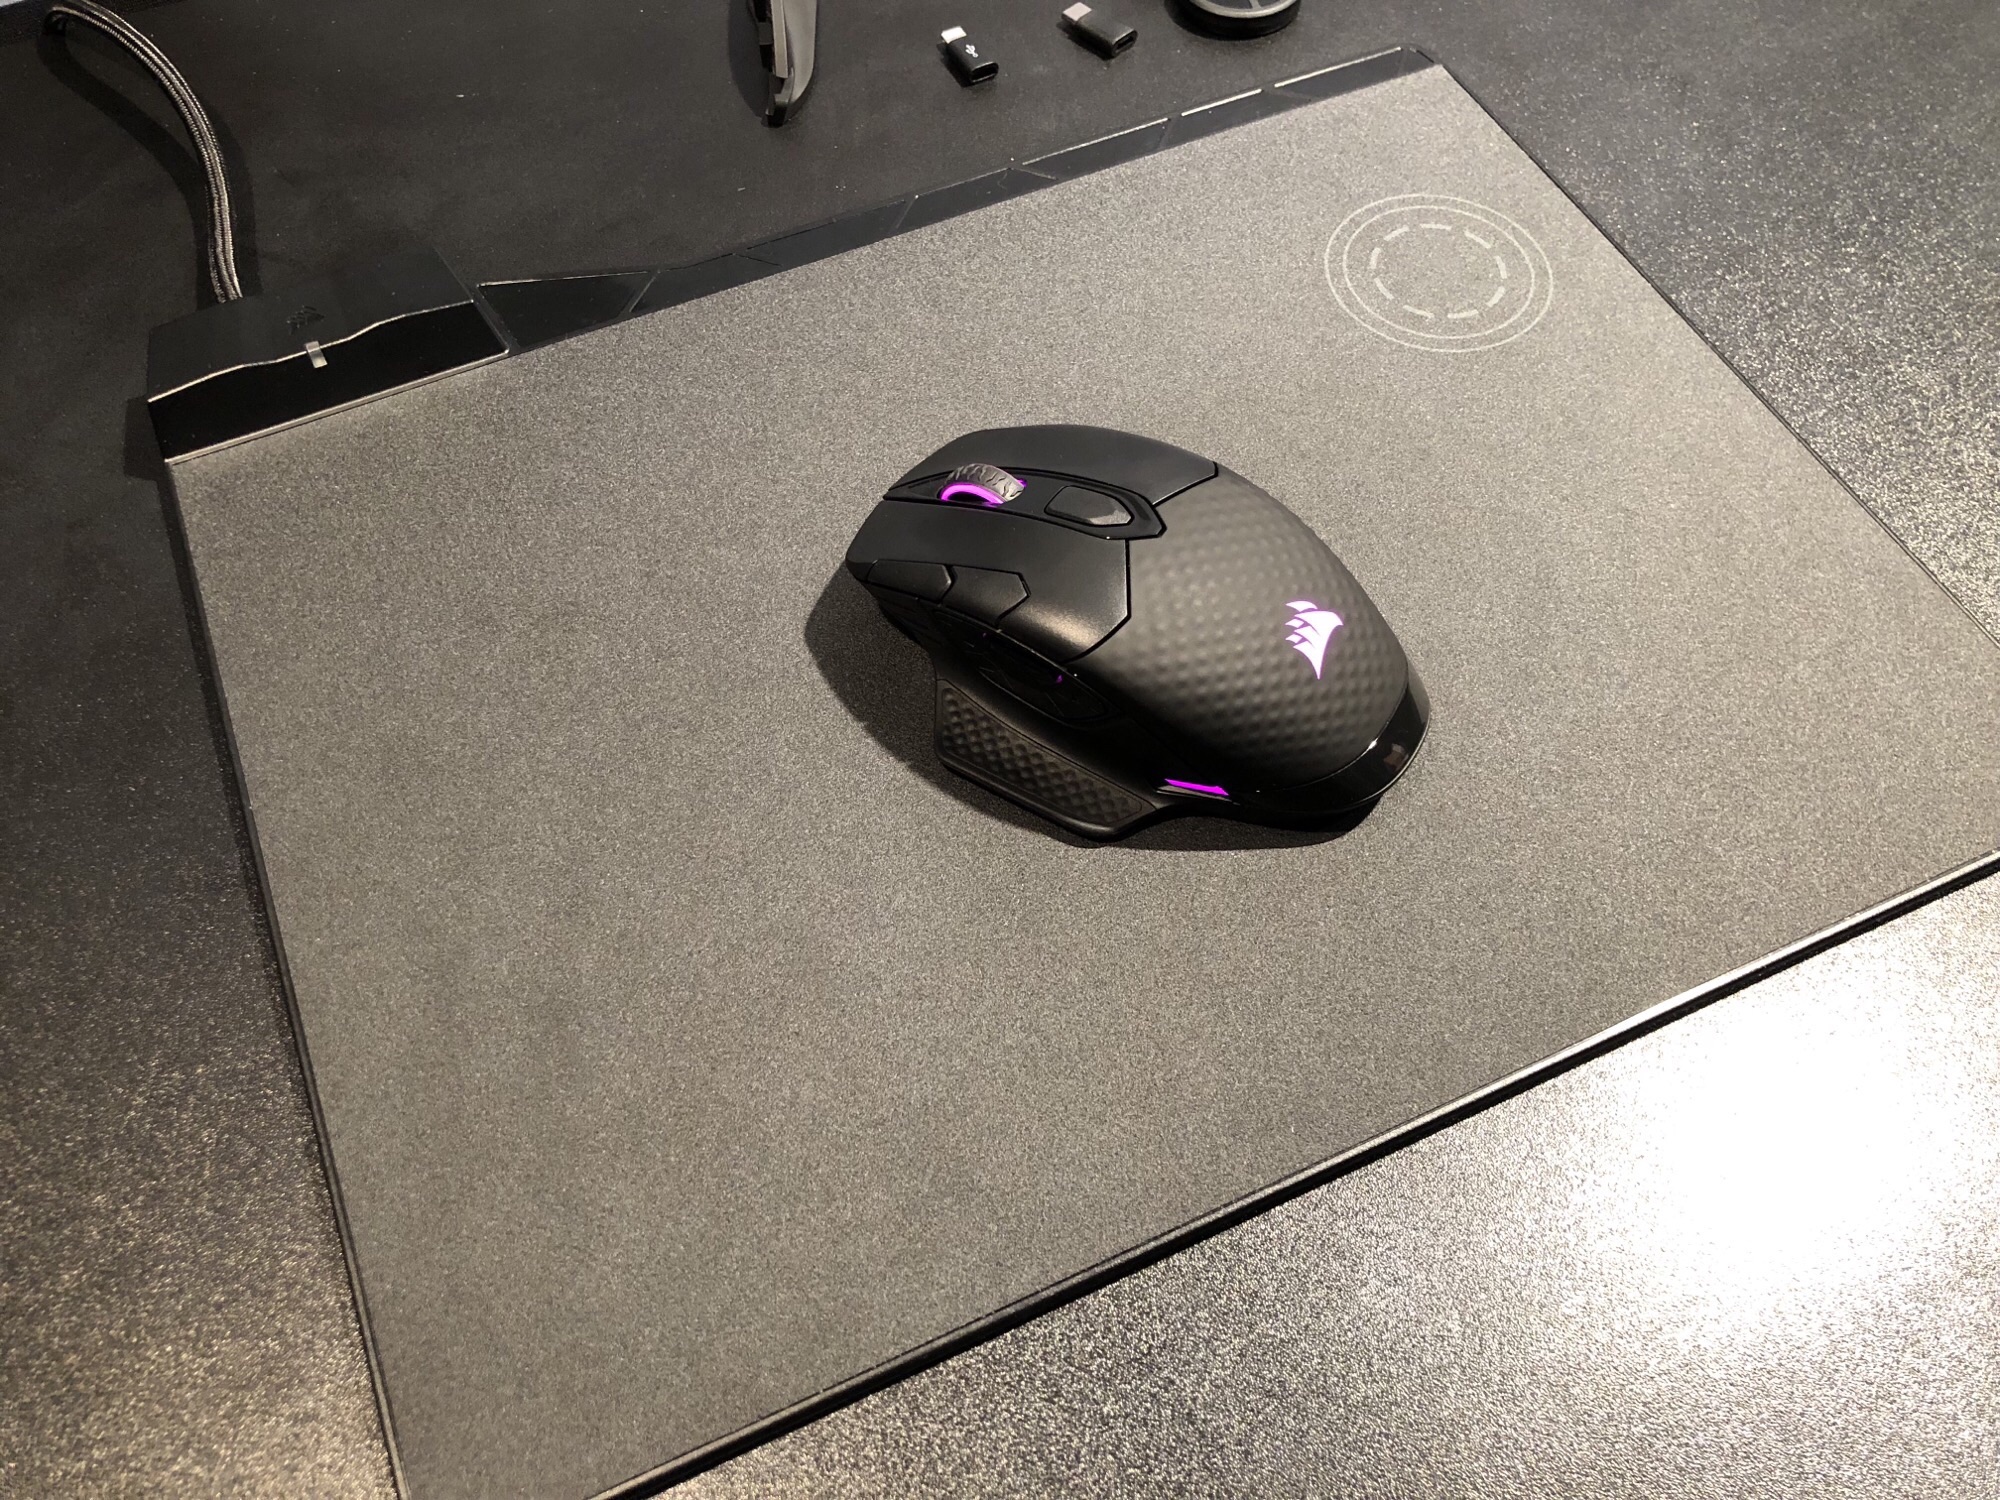 Corsair announces wireless keyboard, mouse and mouse mat - Peripherals -  News 